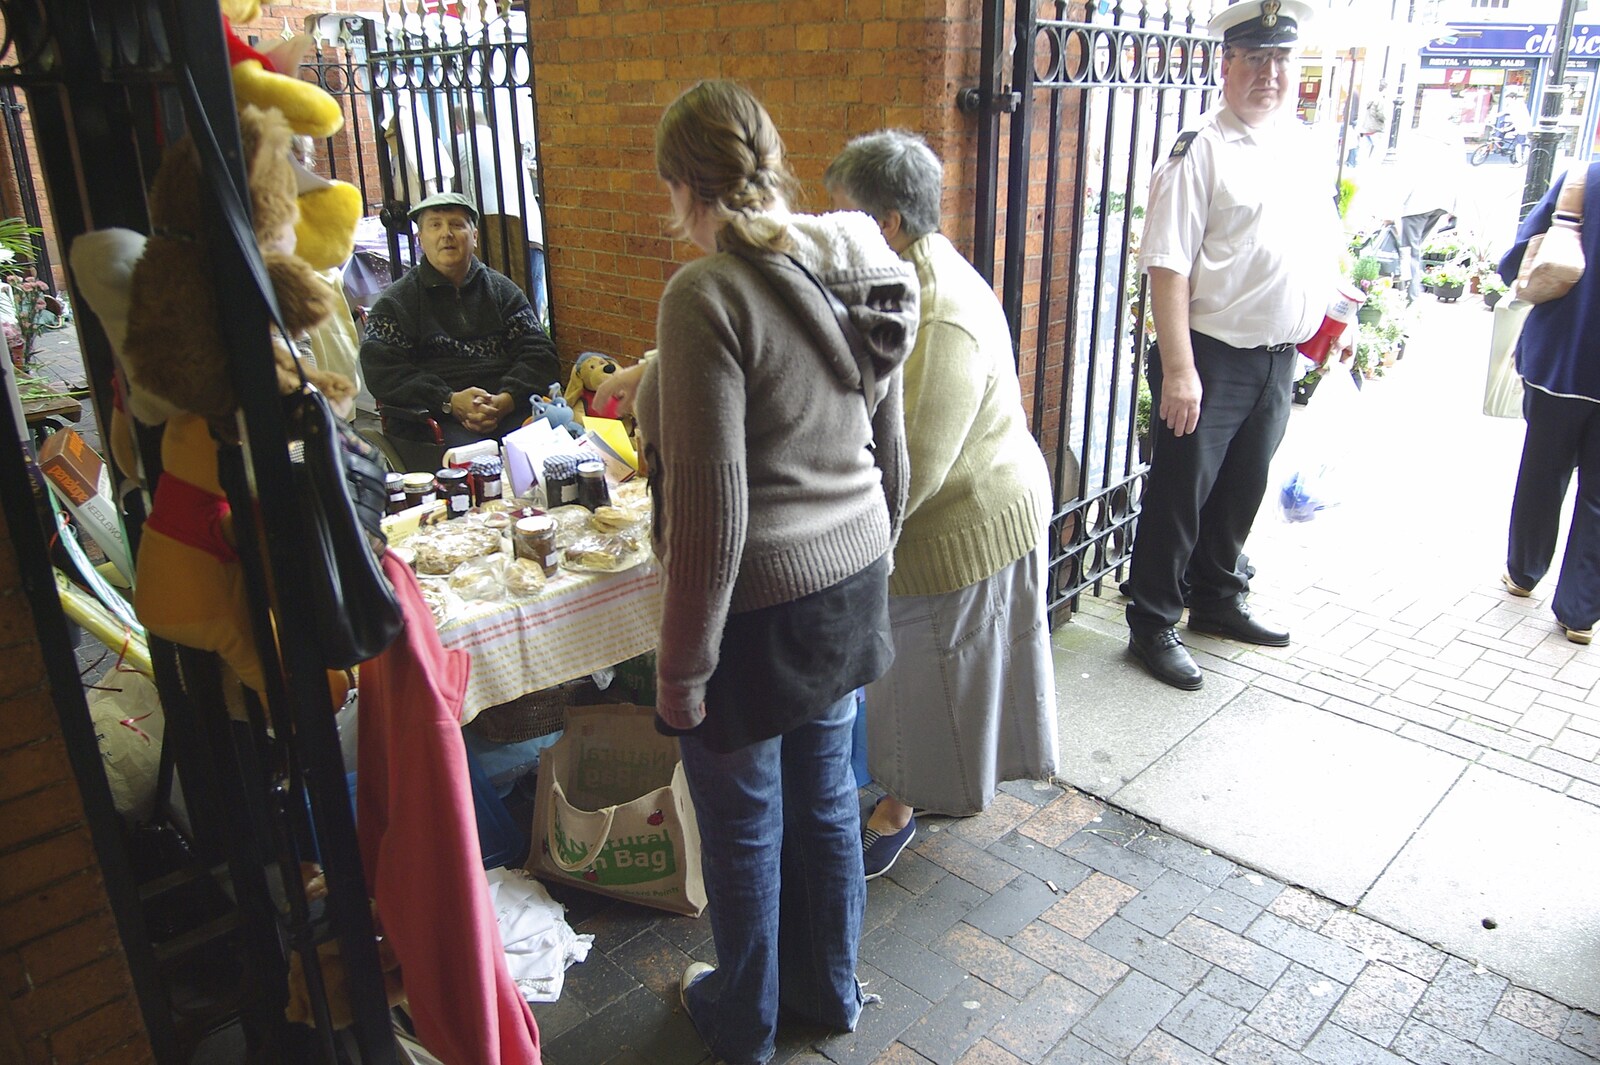 Isobel scopes out a WI stall in Sandbach Market from A Road Trip to Ireland Via Sandbach and Conwy, Cheshire and Wales - 21st September 2007